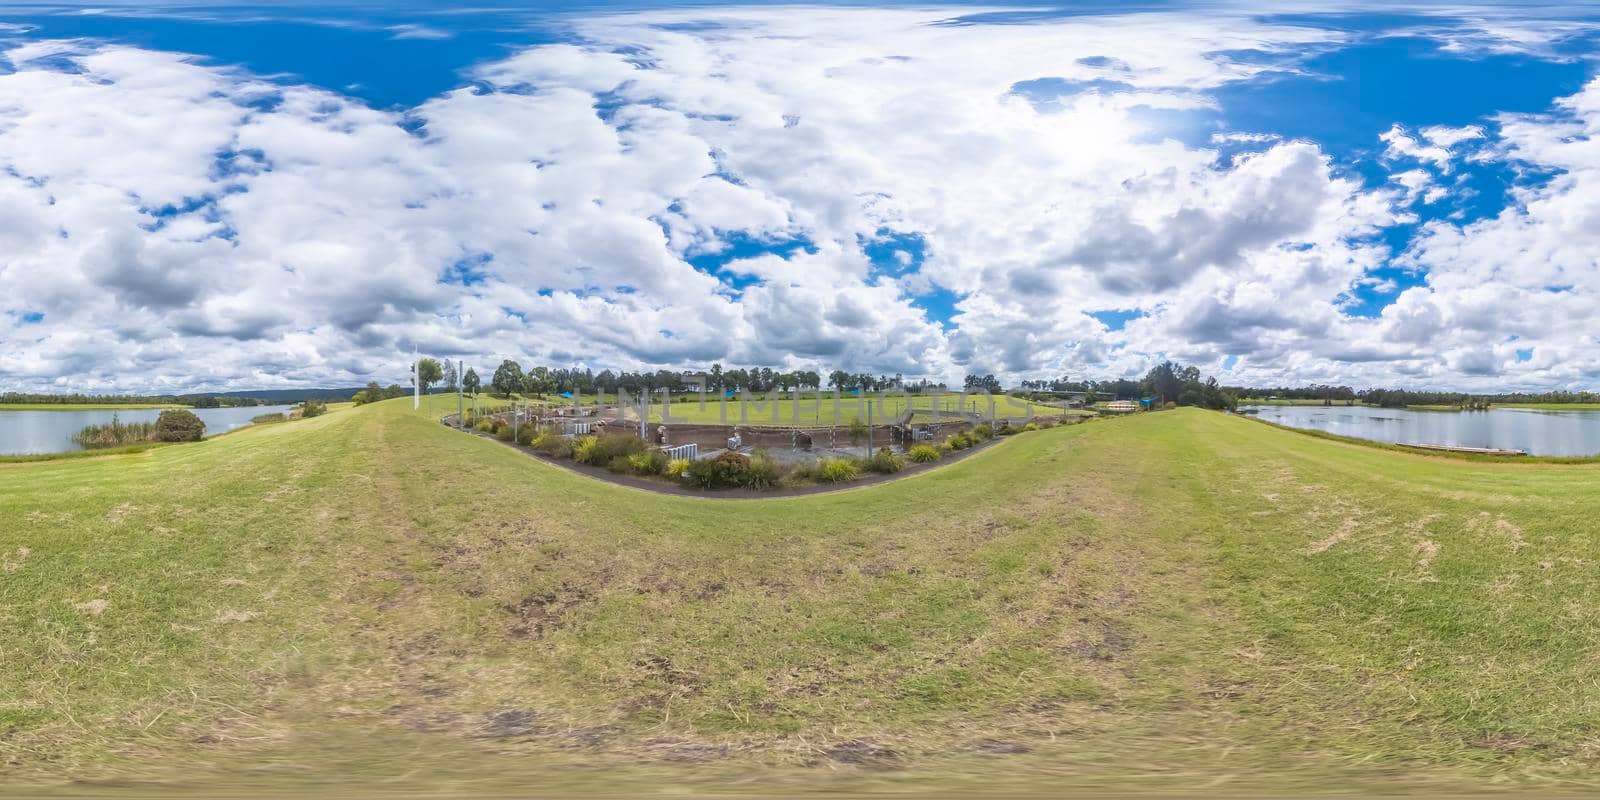 Spherical 360 panorama photograph of the Olympic Whitewater Stadium in Penrith in regional New South Wales in Australia